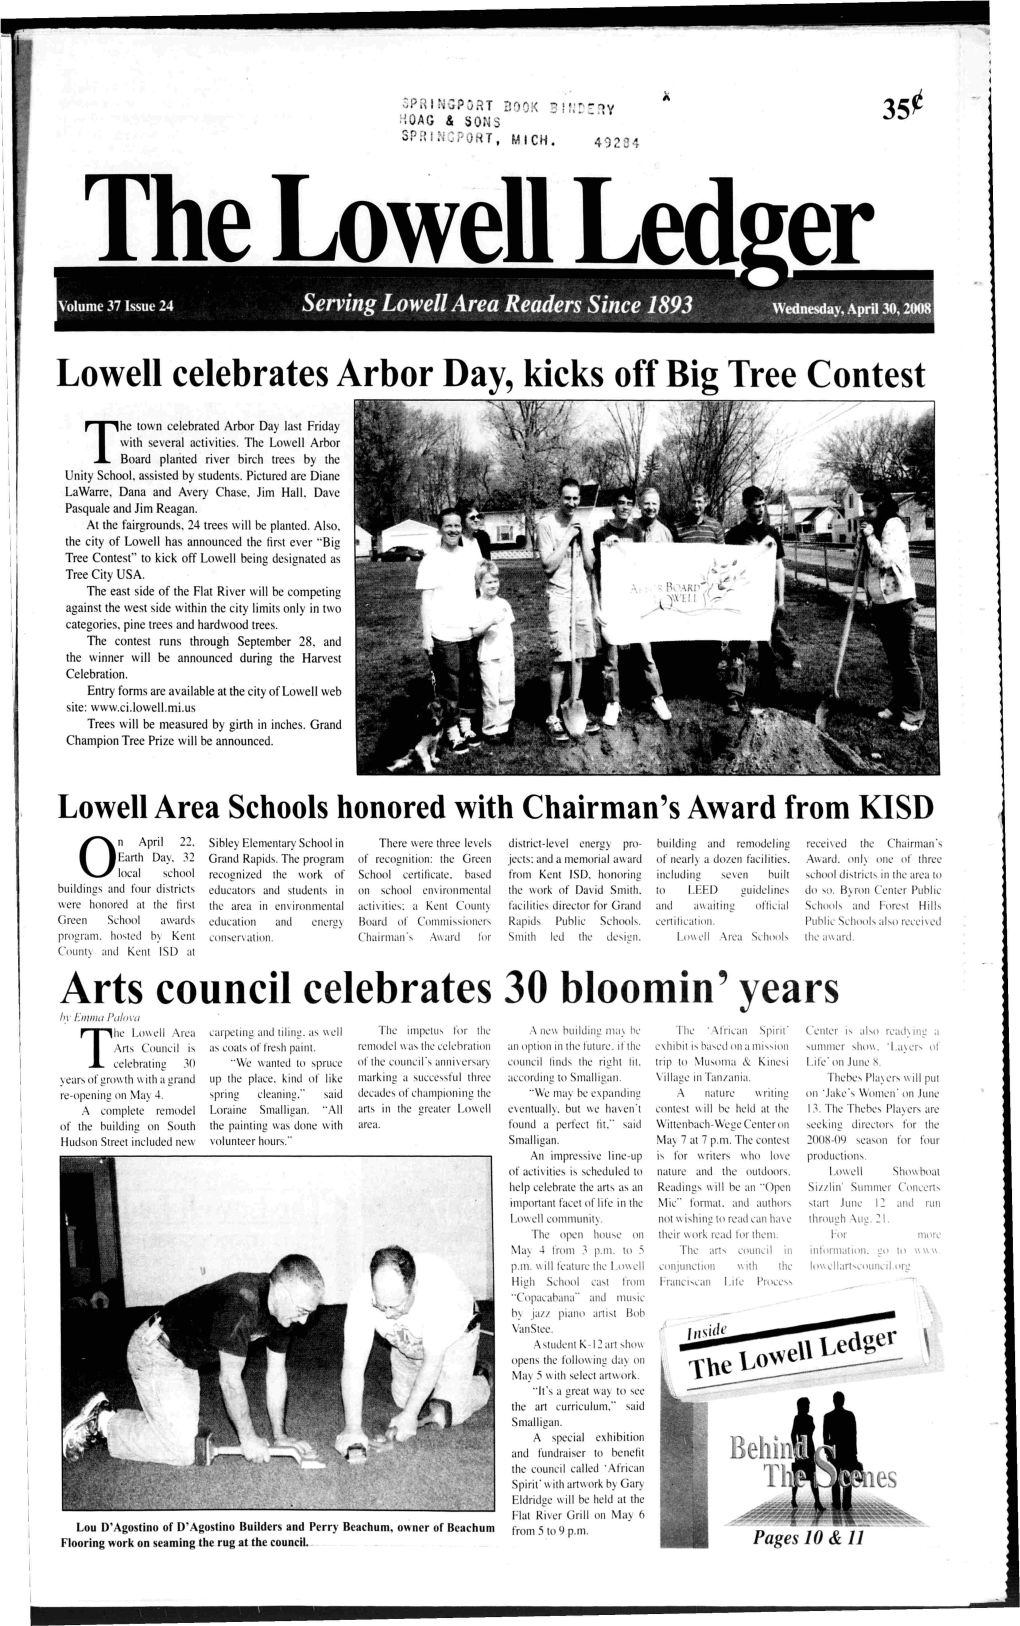 Arts Council Celebrates 30 Bloomin' Years by Emnw Pal Ova He Lowell Area Carpeting and Liliiil